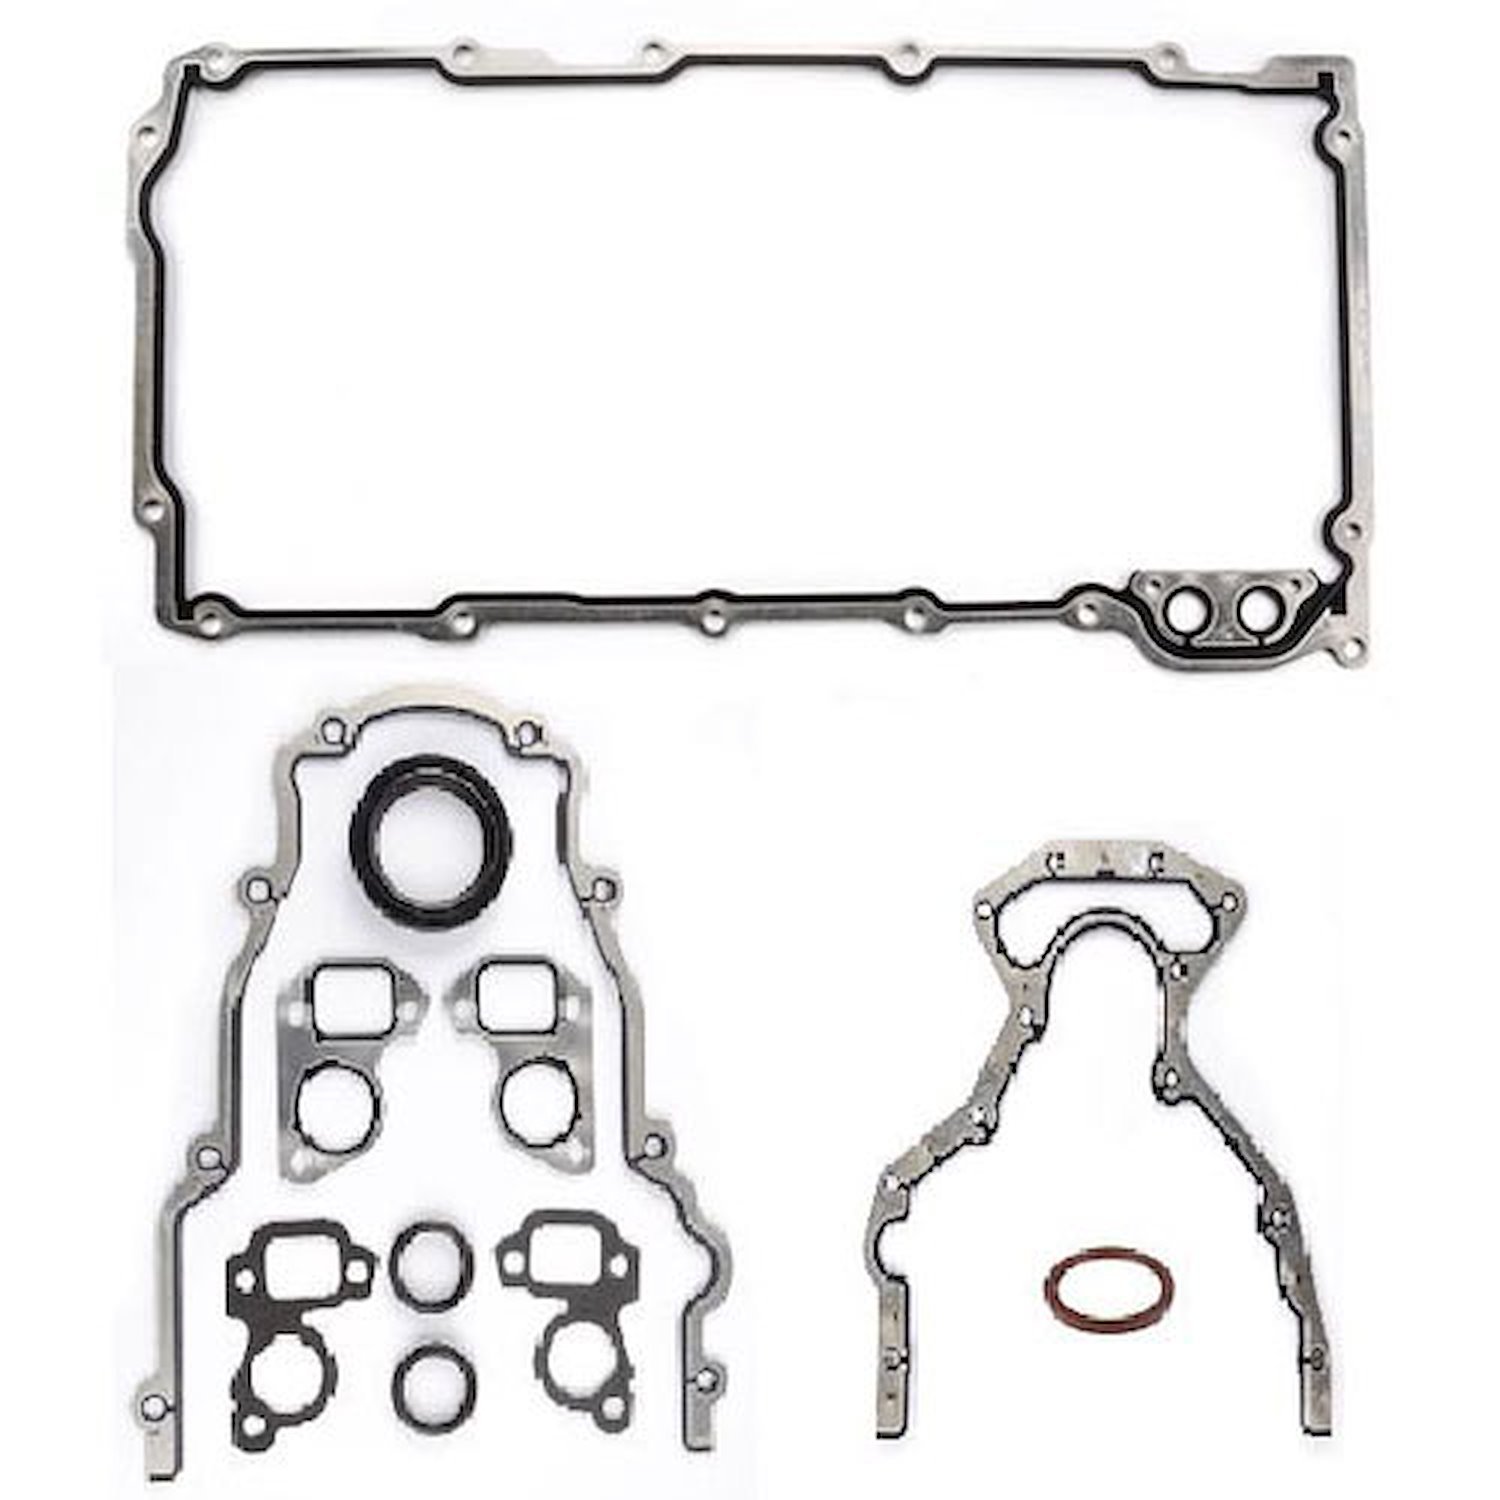 Gasket Kit Lower for GM LS1, LS2, and